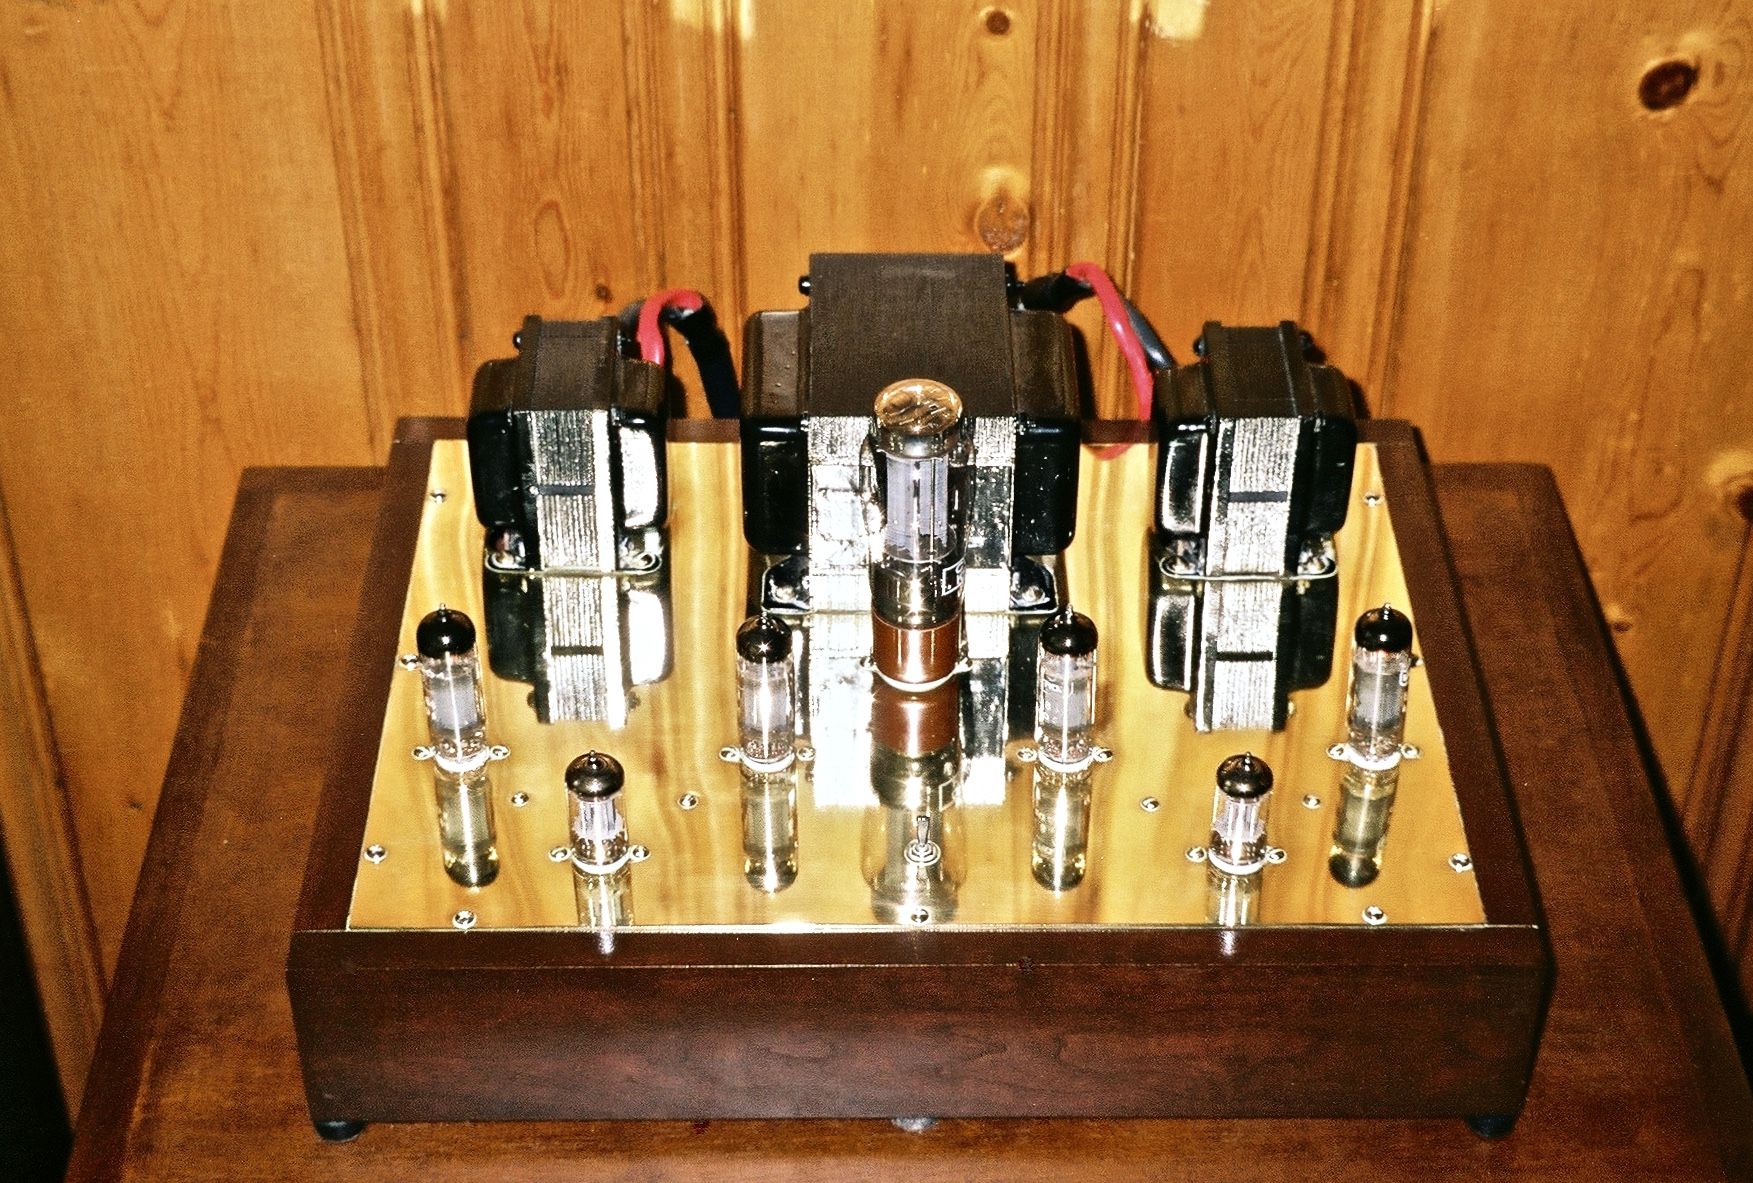 My Custom EL-84 amp I built with vintage Pilot Iron, NOS Mullard Rectifier, and NOS German driver and output tubes 